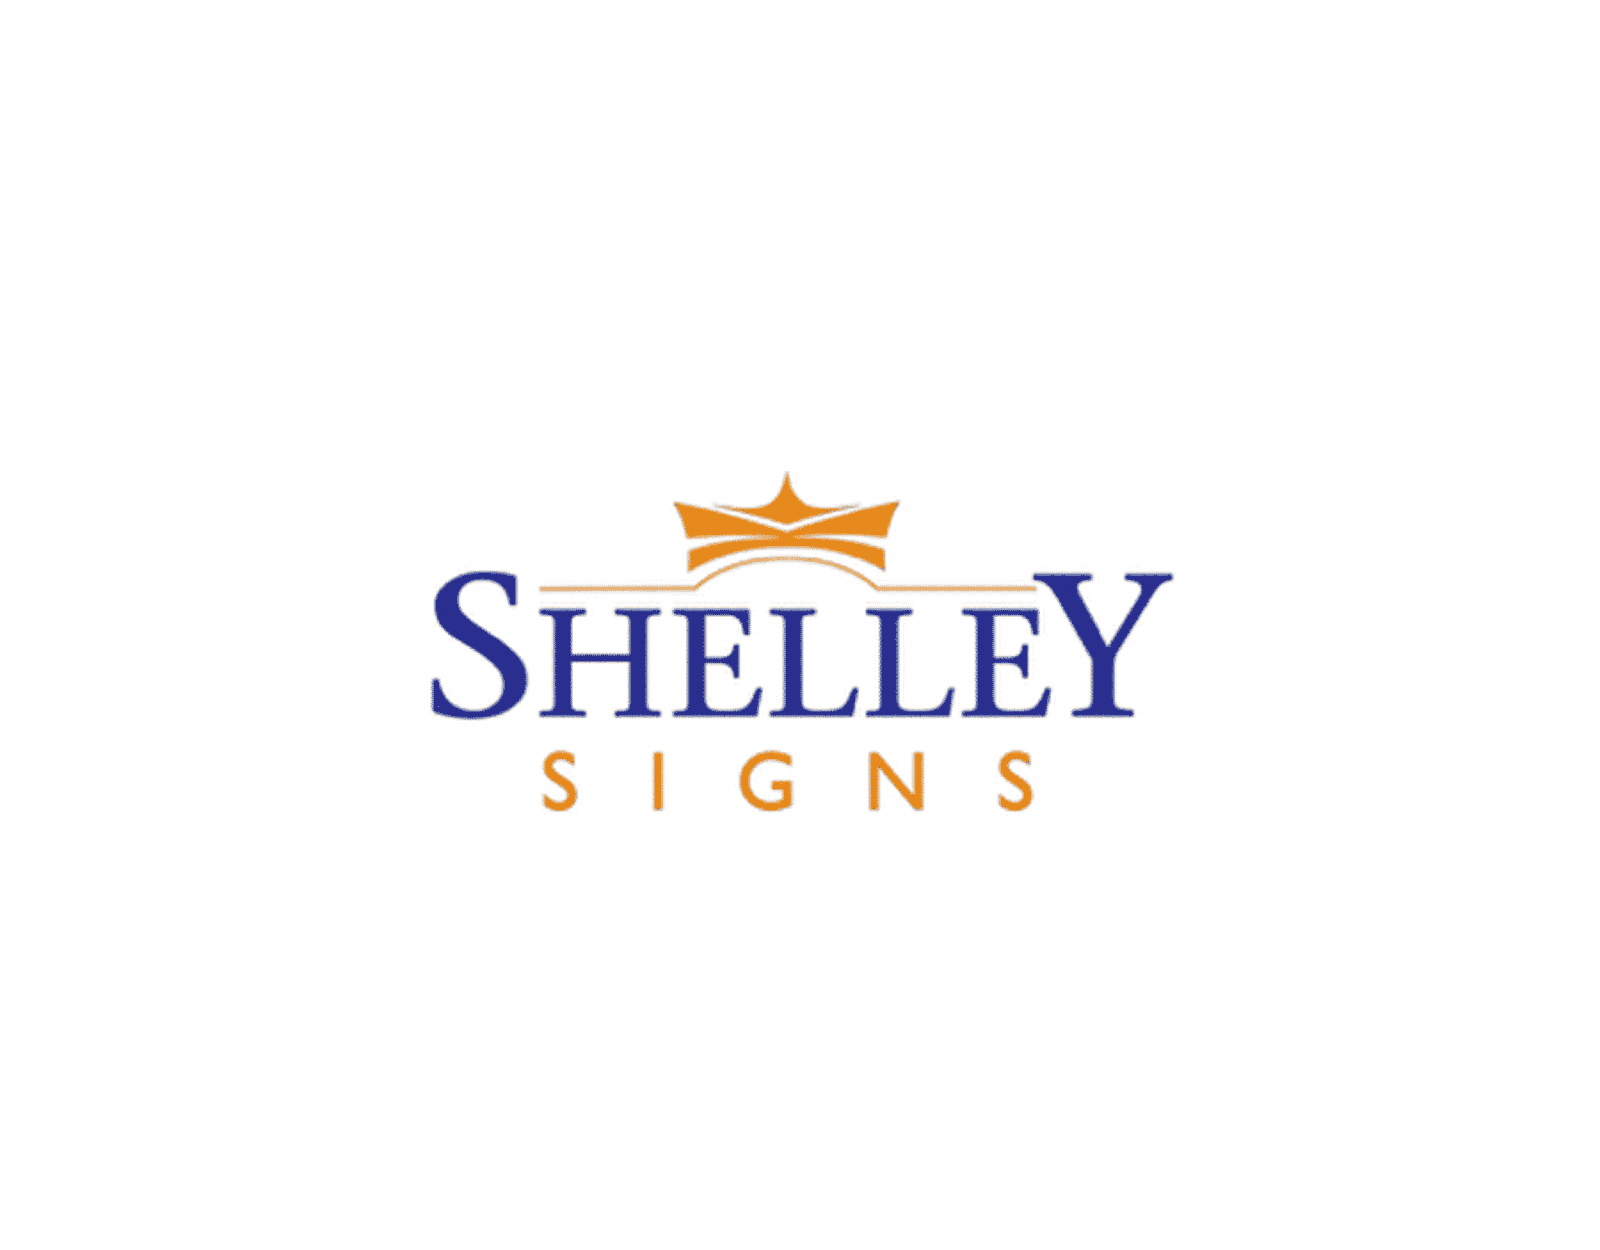 Shelley Signs old logo